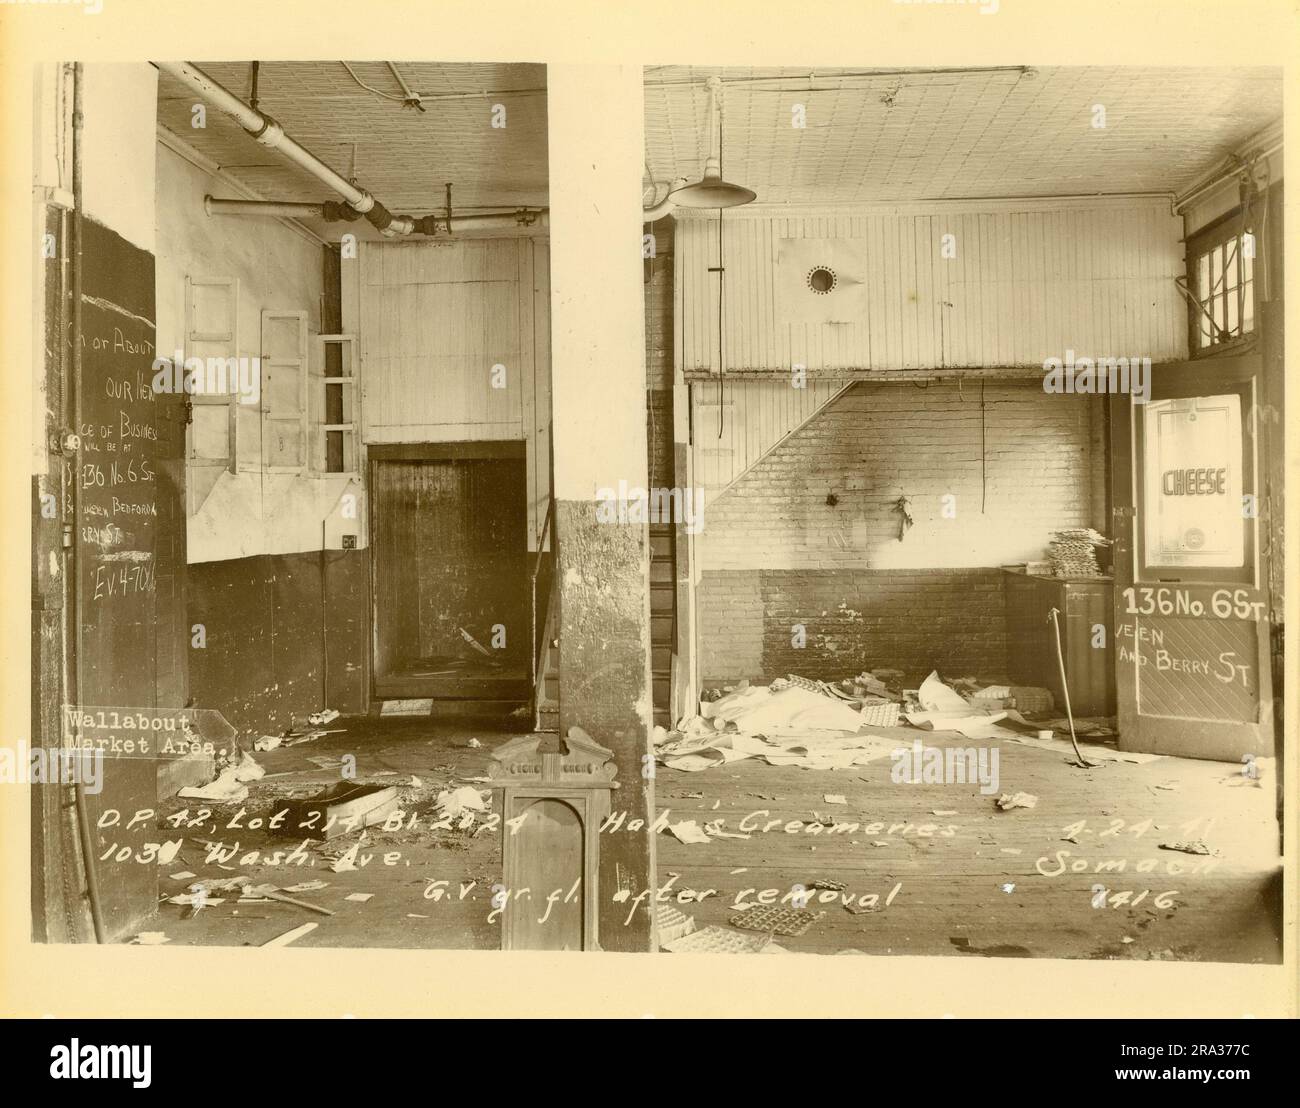 Photograph of interior of lot 214, Bl. 2024, 1031 Wash. Ave., Hahn's Creameries, ground floor after removal. Stock Photo